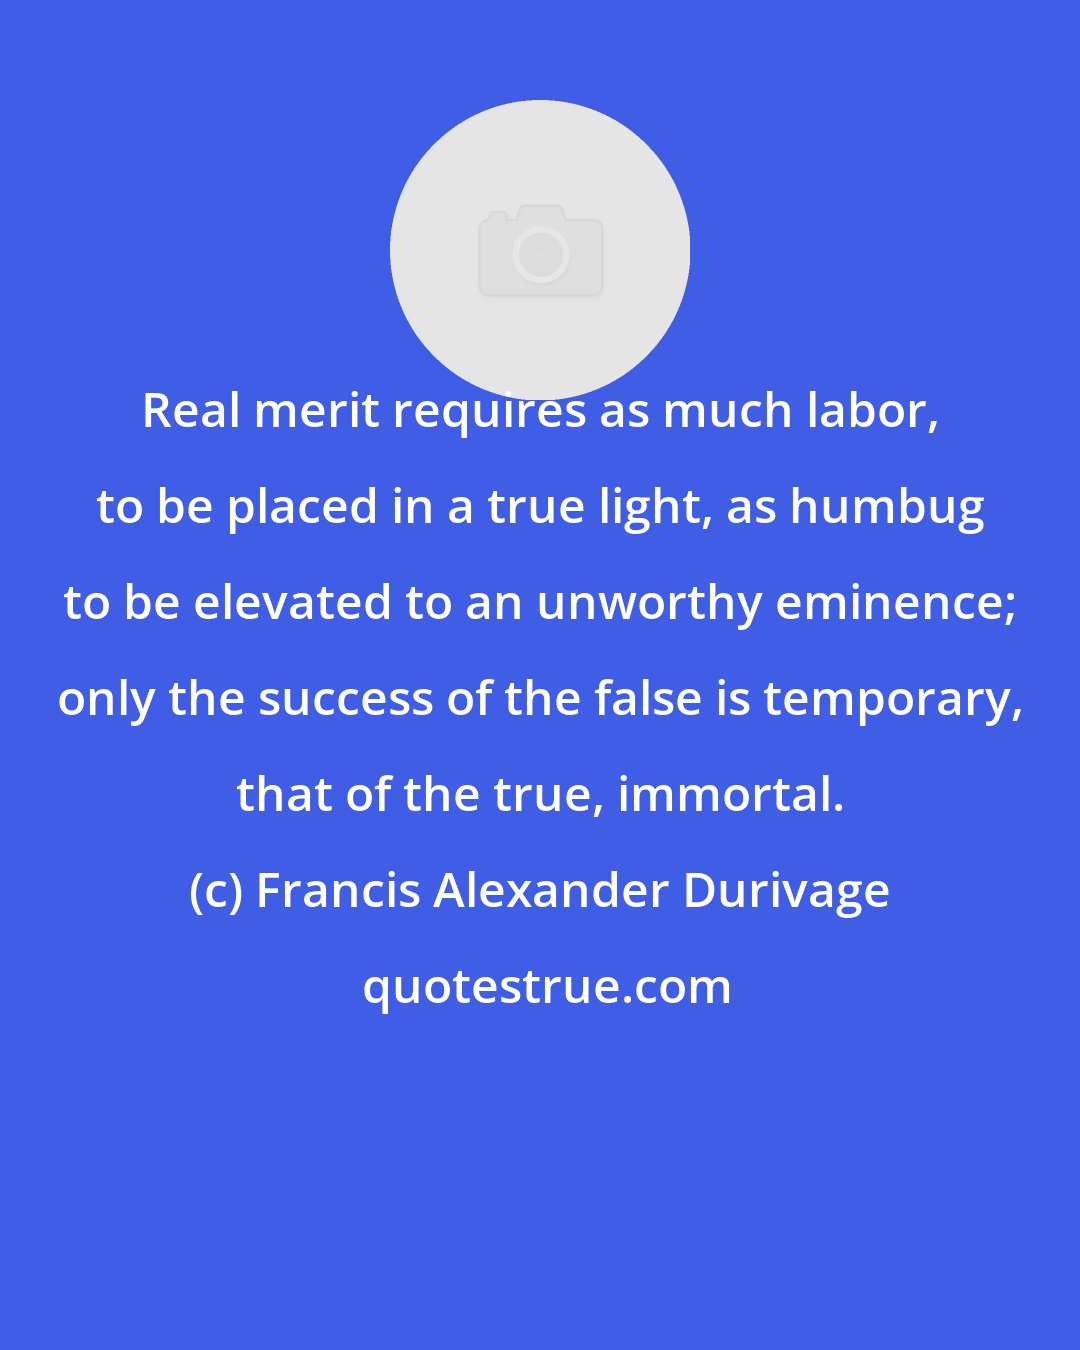 Francis Alexander Durivage: Real merit requires as much labor, to be placed in a true light, as humbug to be elevated to an unworthy eminence; only the success of the false is temporary, that of the true, immortal.